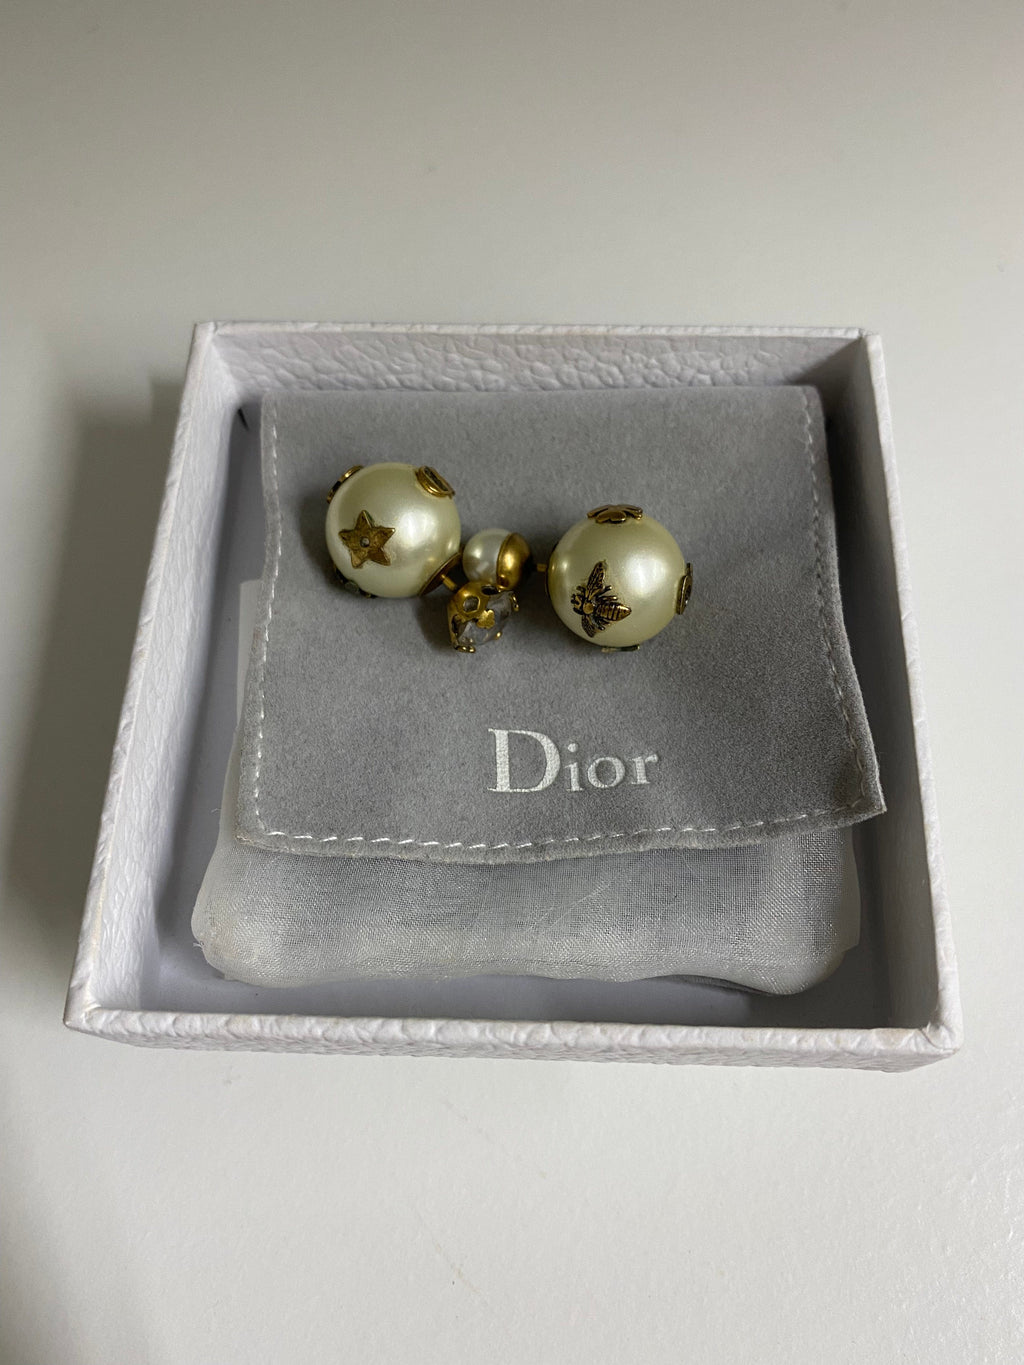 Dior - Authenticated Tribal Earrings - Leather White for Women, Very Good Condition